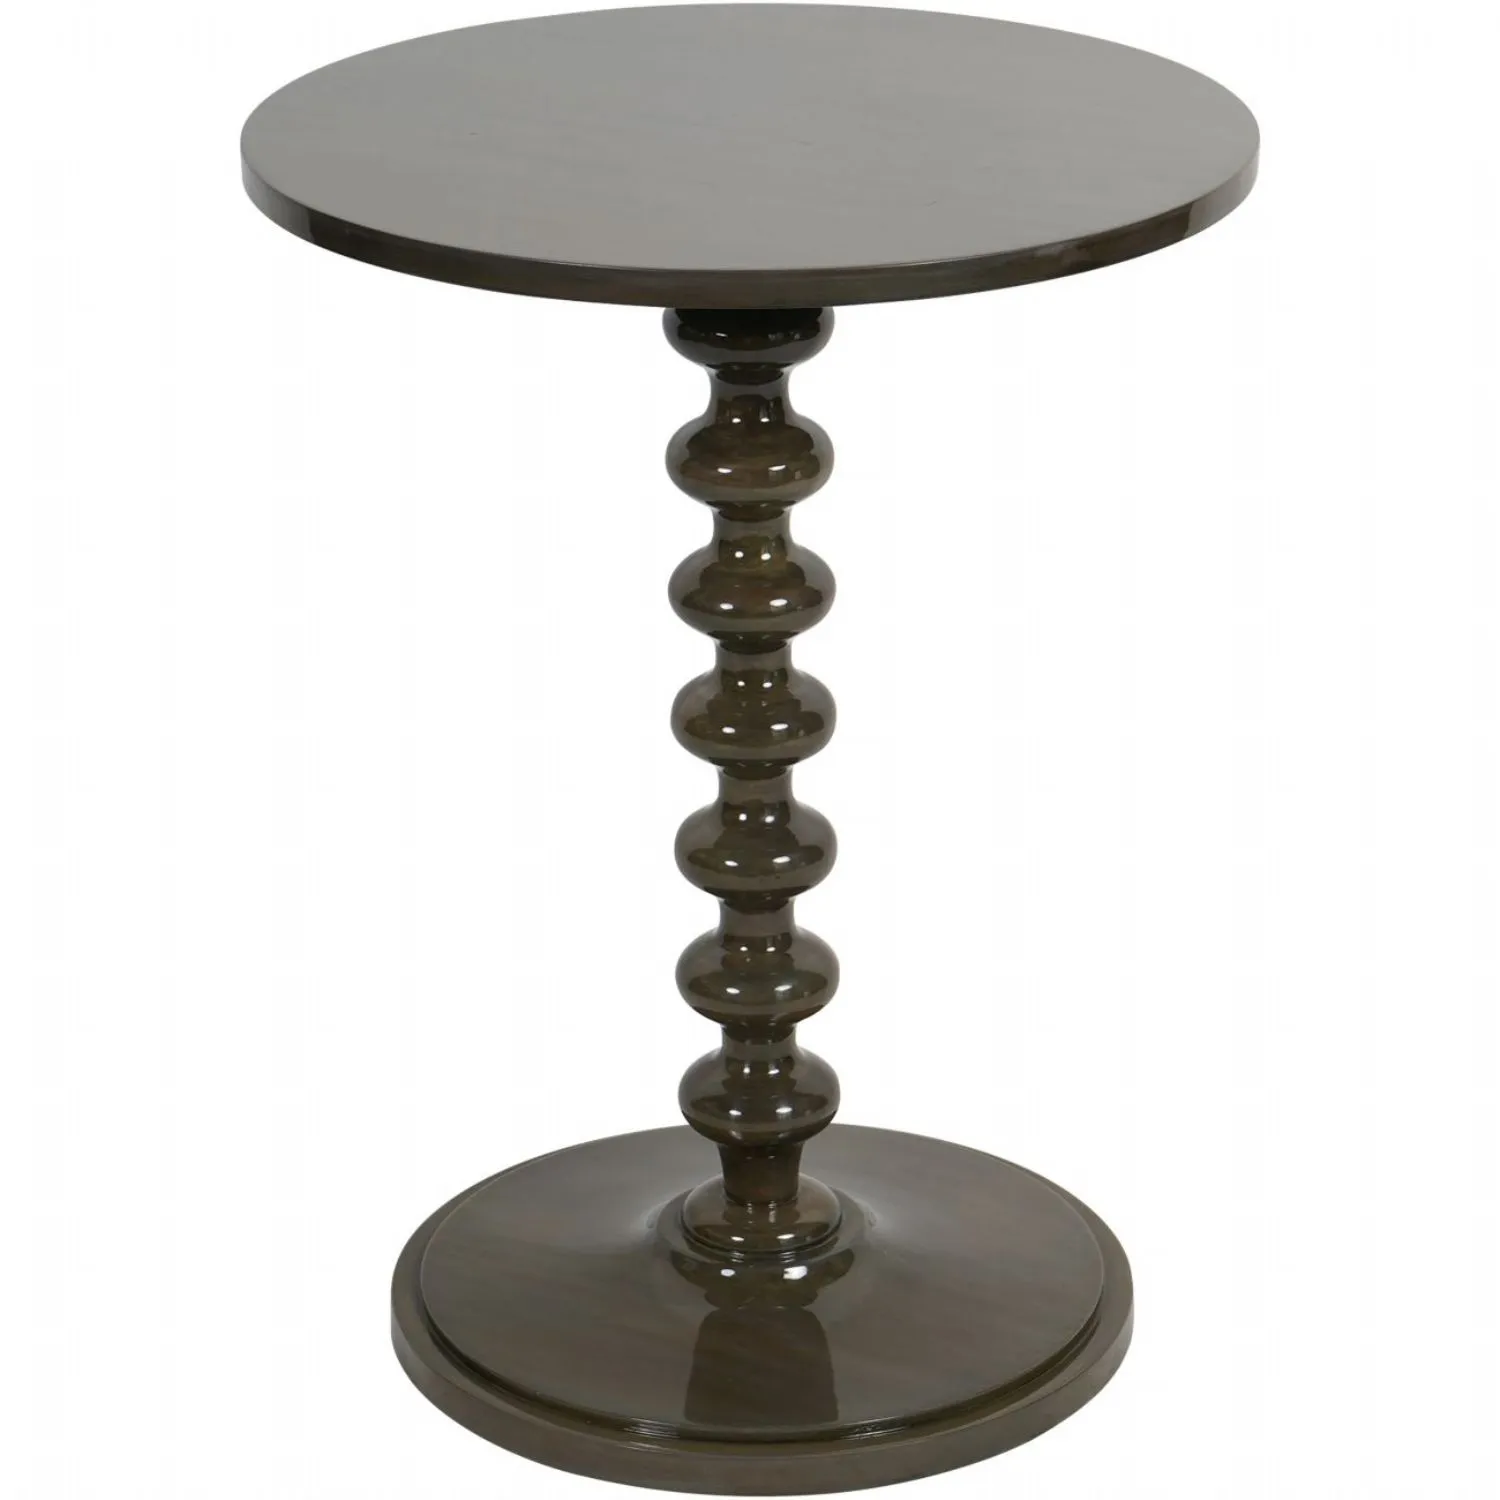 Olive Lacquered Glossy Wooden Round Side Table